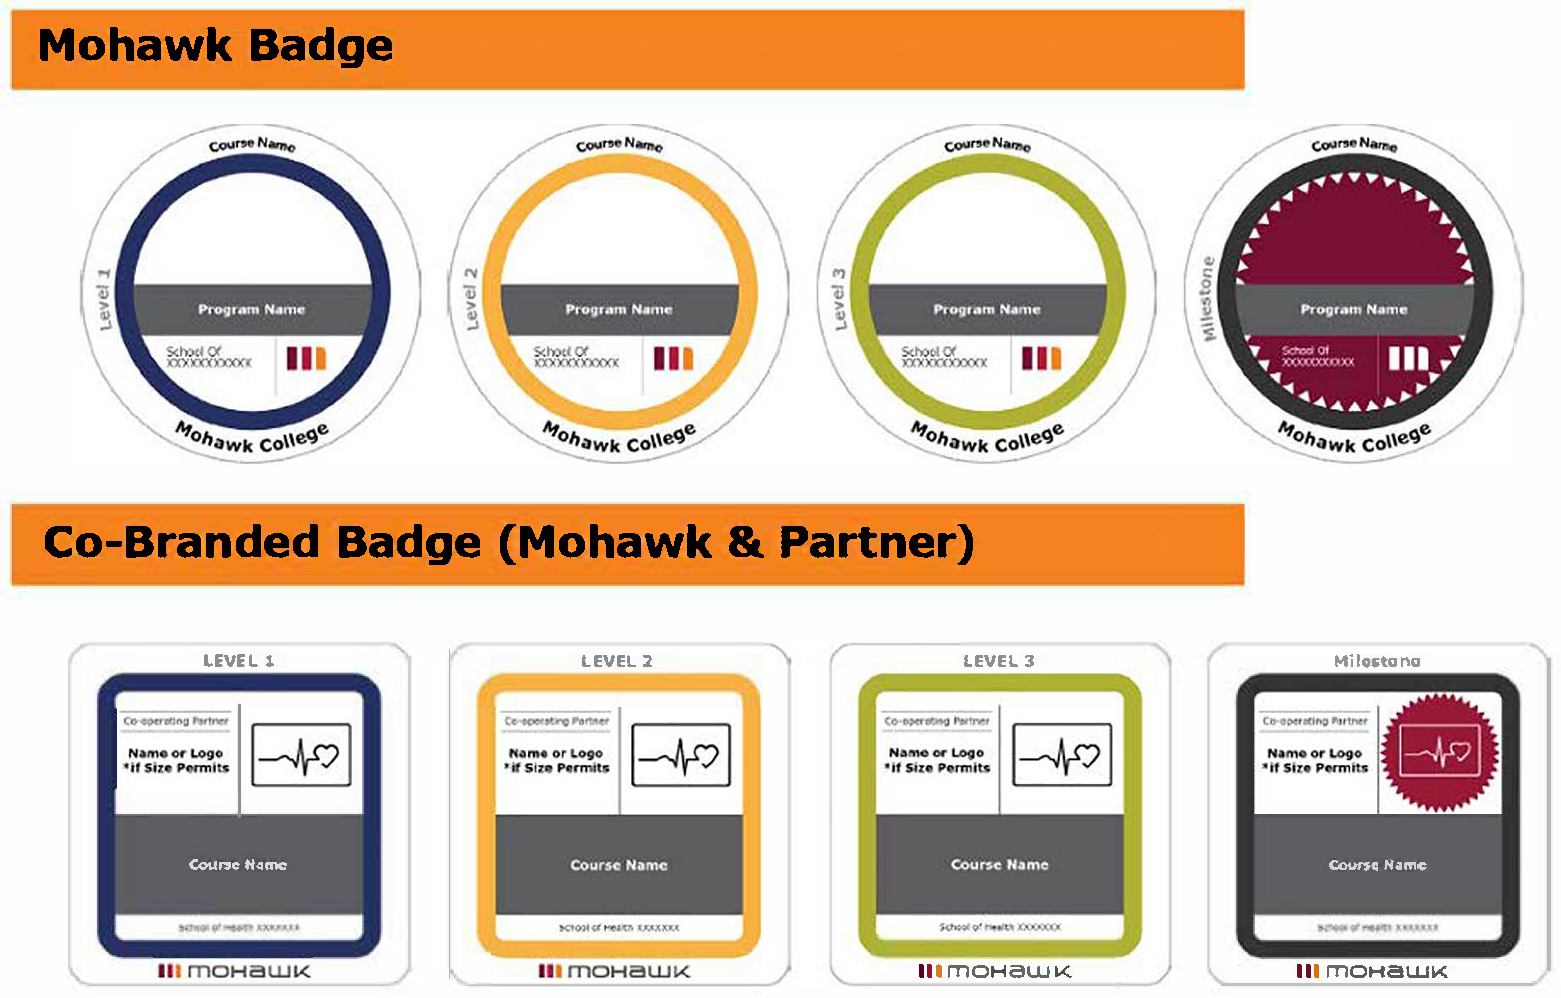 Examples of Mohawk Badges and Co-Branded badges